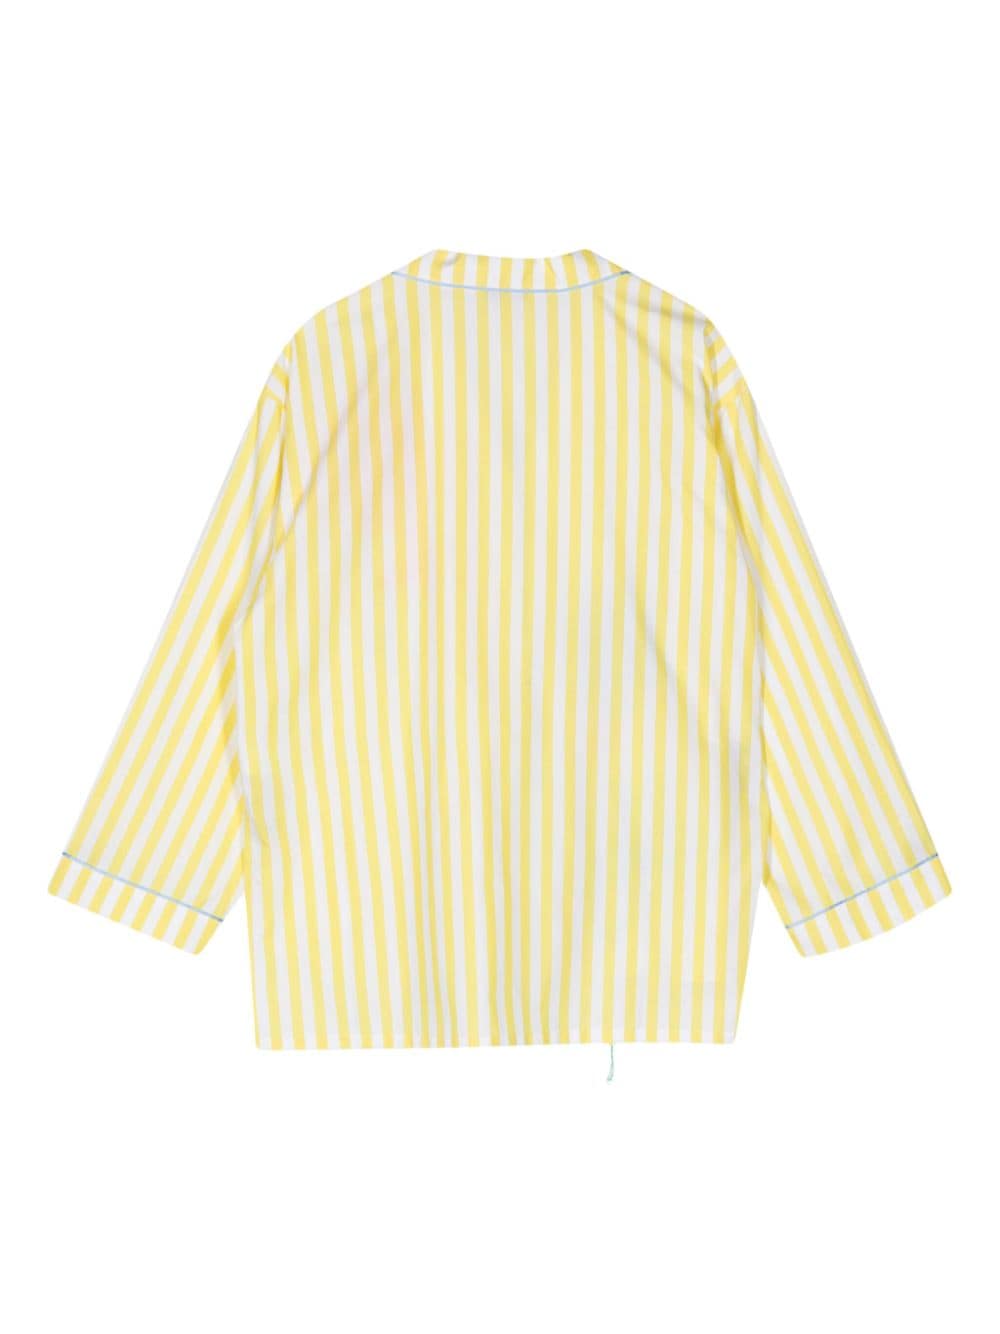 Mira Mikati floral-embroidered cotton shirt - Geel